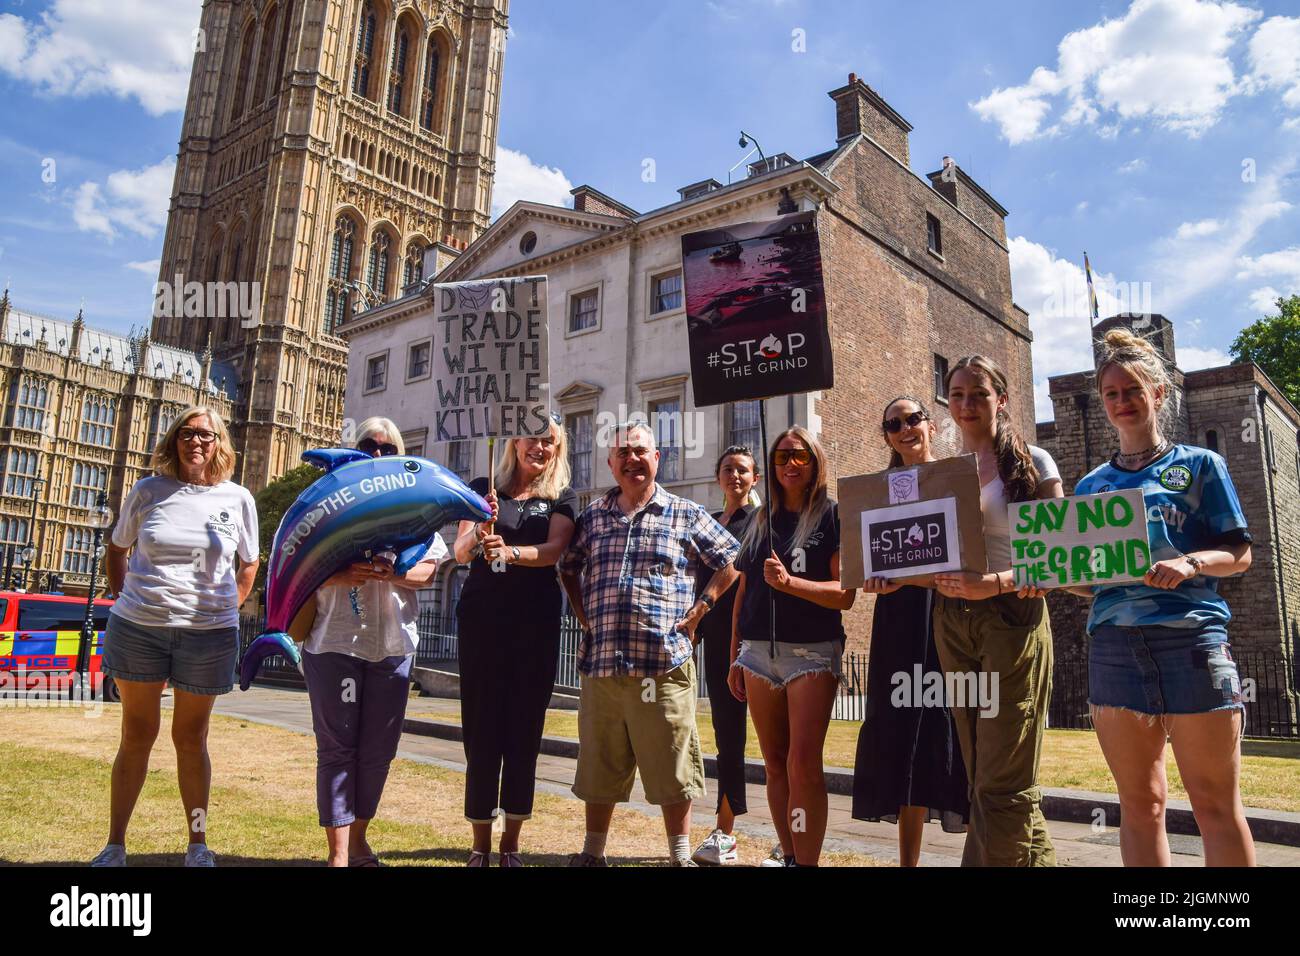 London, UK. 11th July, 2022. Dominic Dyer (center) from the wildlife conservation charity Born Free stands with protesters holding placards demanding an end to dolphin and whale hunts, during the demonstration. Ocean and marine wildlife conservation organization Sea Shepherd staged a rally outside the Parliament as MPs debated a petition to suspend trade with the Faroe Islands until they end brutal whale and dolphin hunts, known as the 'Grind'. Credit: SOPA Images Limited/Alamy Live News Stock Photo